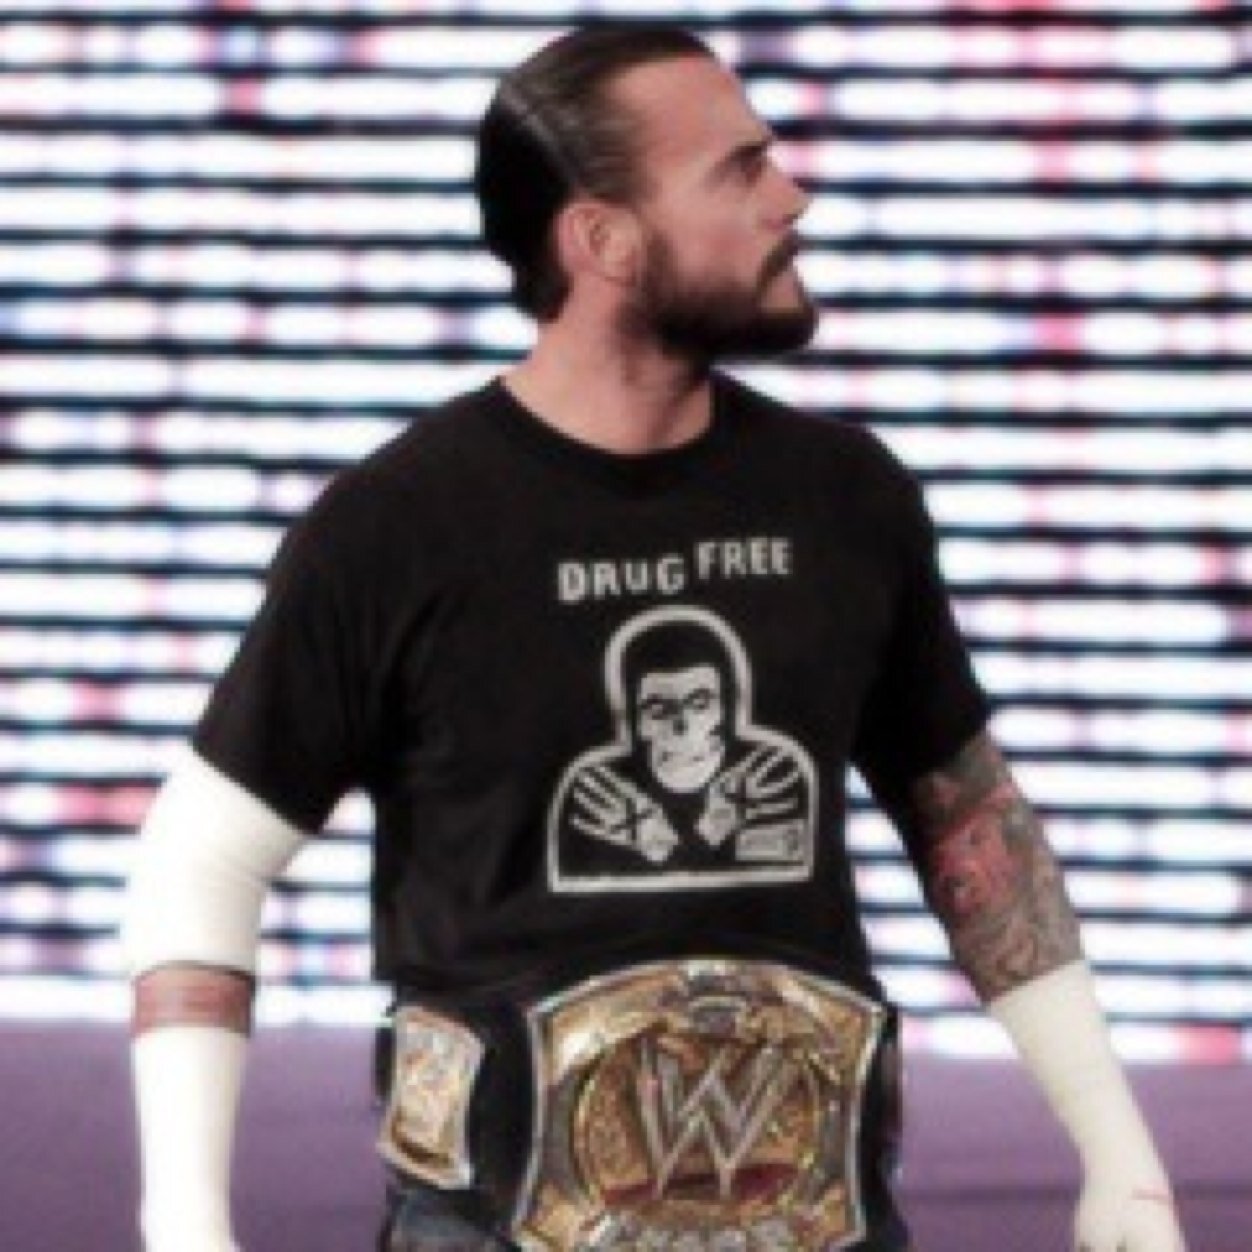 Punk forever + wwe is my life